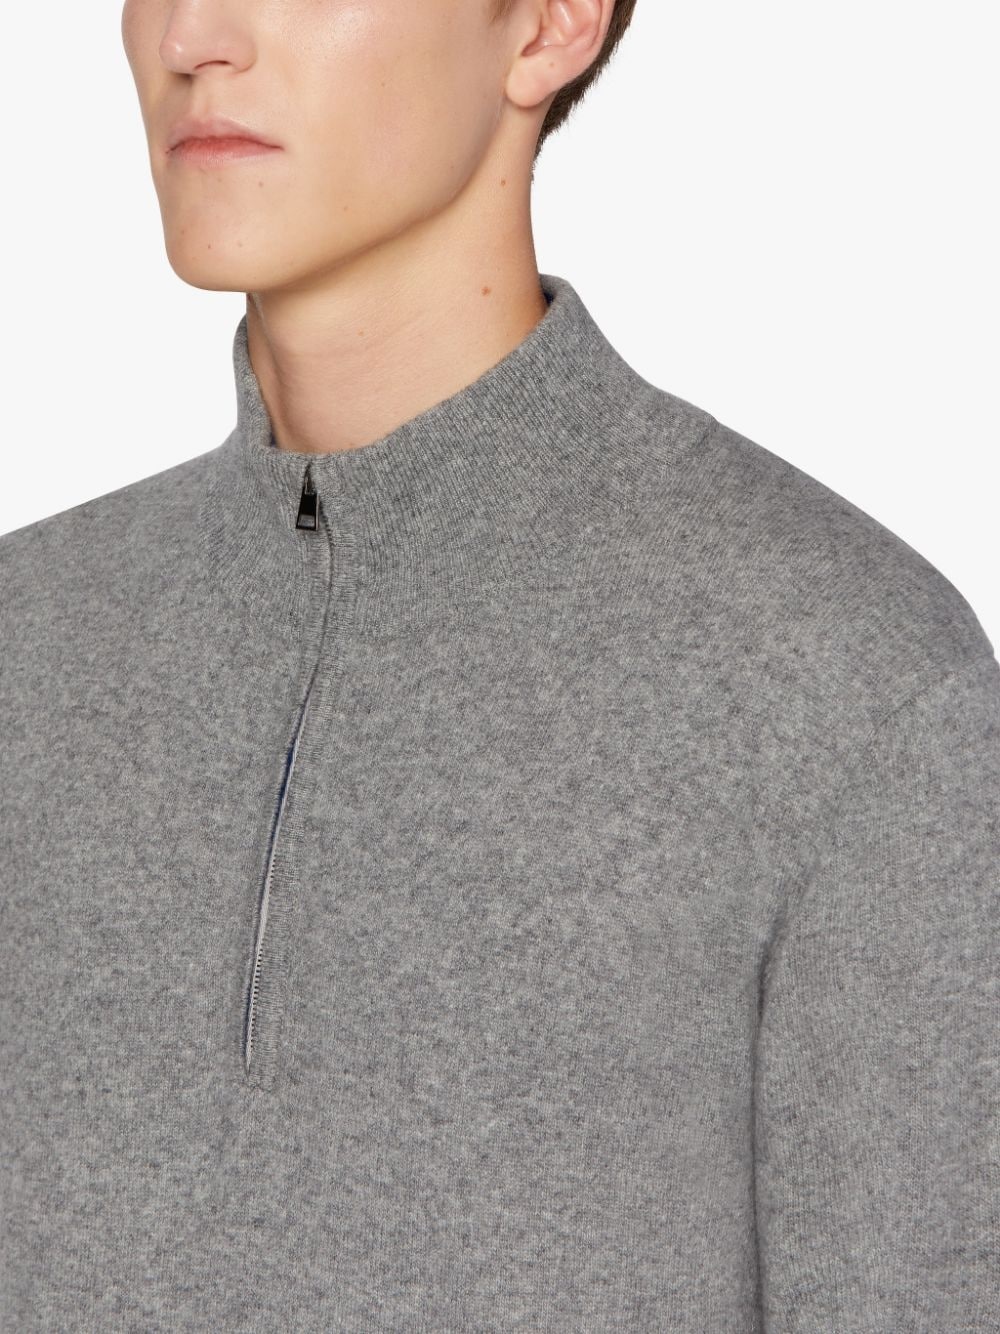 IN AND OUT GREY WOOL SWEATER | GKM-203 - 5